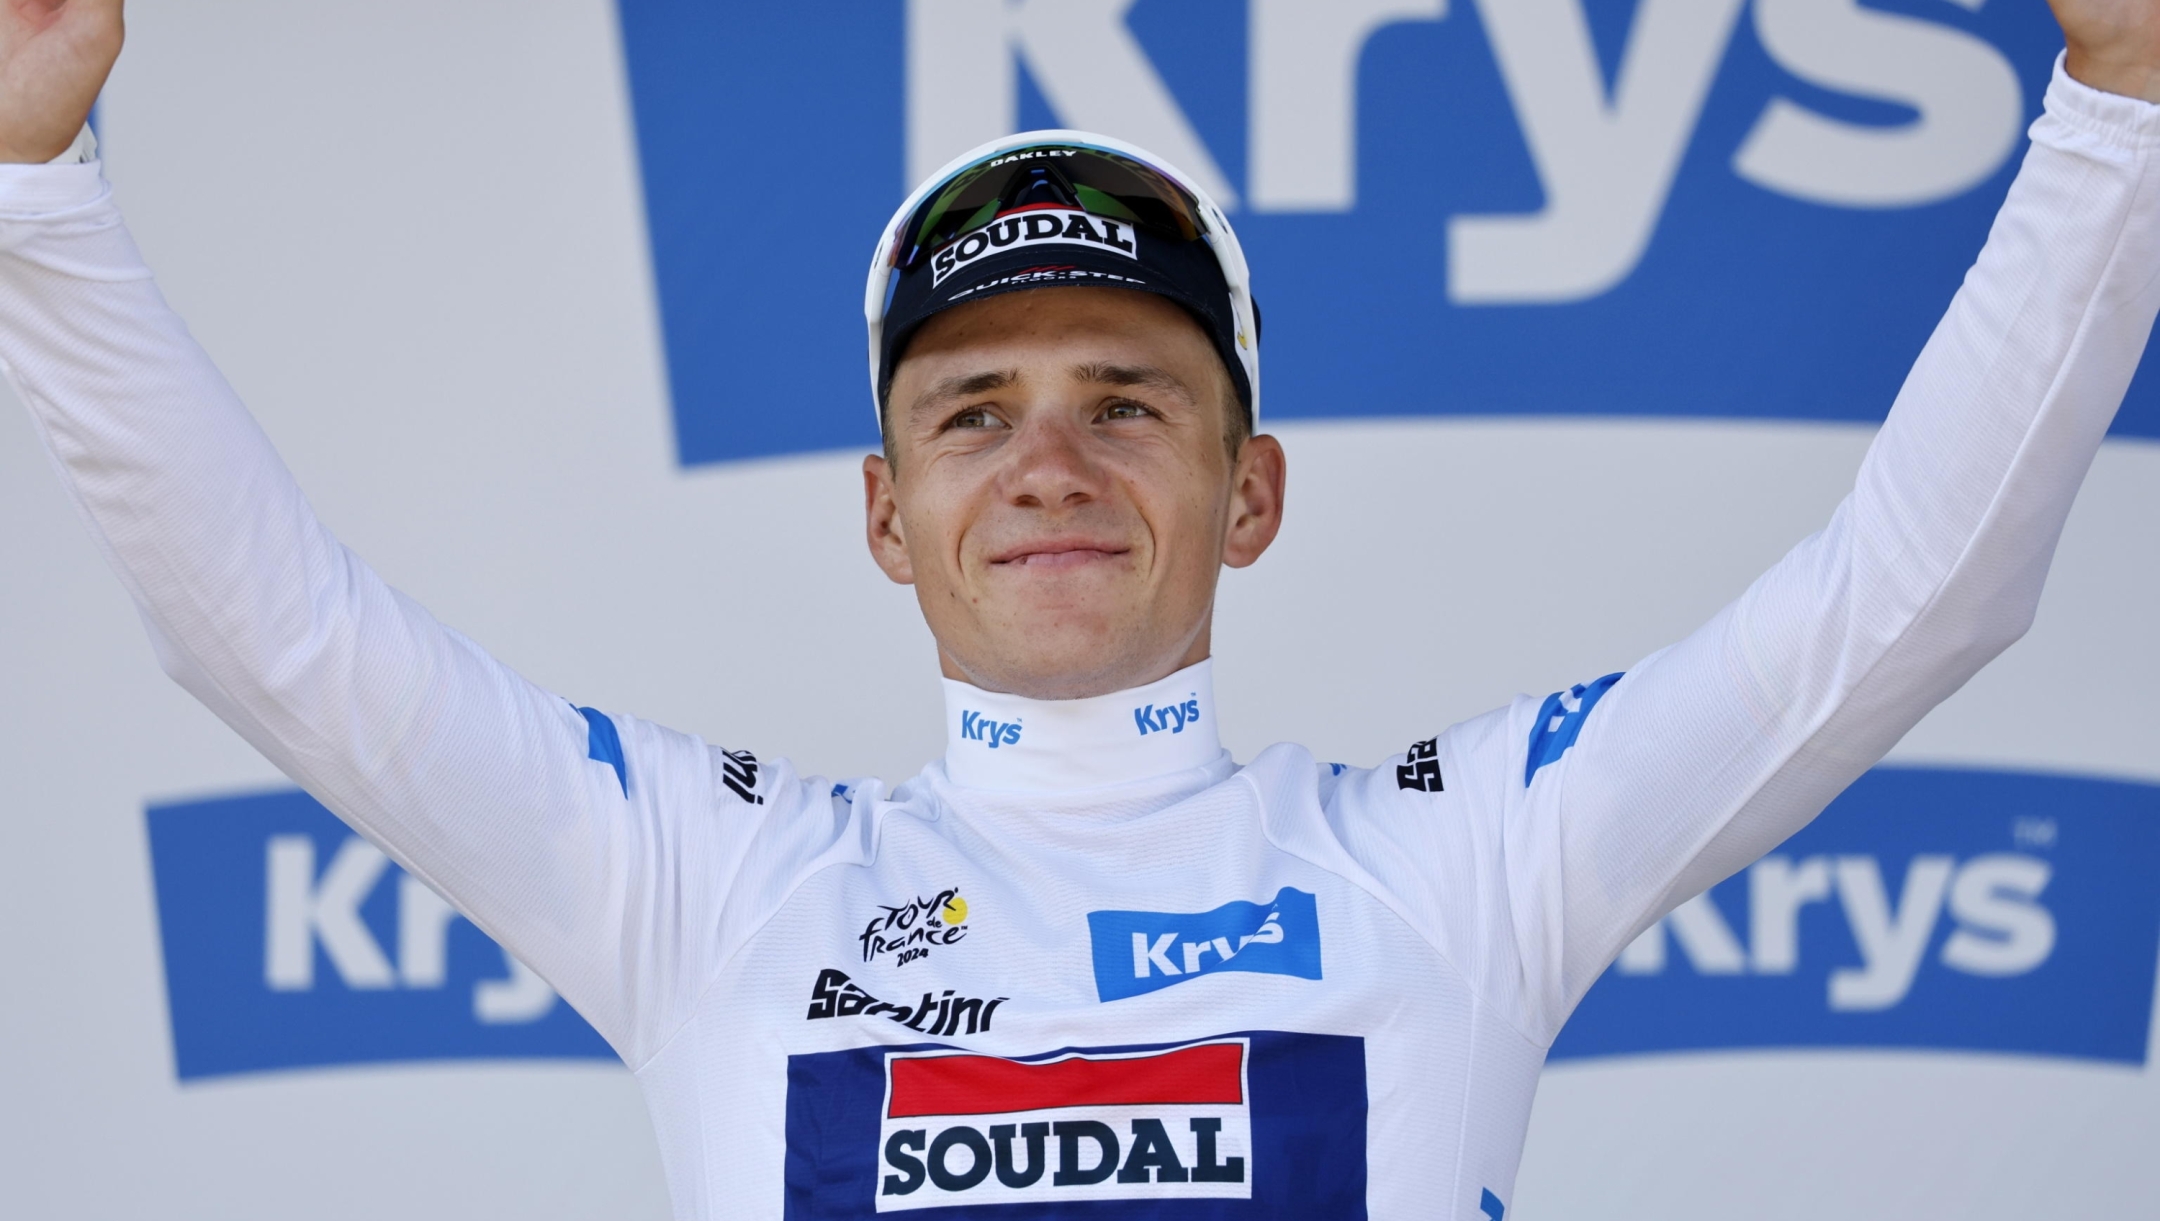 epa11483874 Belgian rider Remco Evenepoel of Soudal Quick-Step celebrates on the podium wearing the best young rider's white jersey following the end of the 17th stage of the 2024 Tour de France cycling race over 177km from Saint-Paul-Trois-Chateaux to Superdevoluy, France, 17 July 2024.  EPA/SEBASTIEN NOGIER